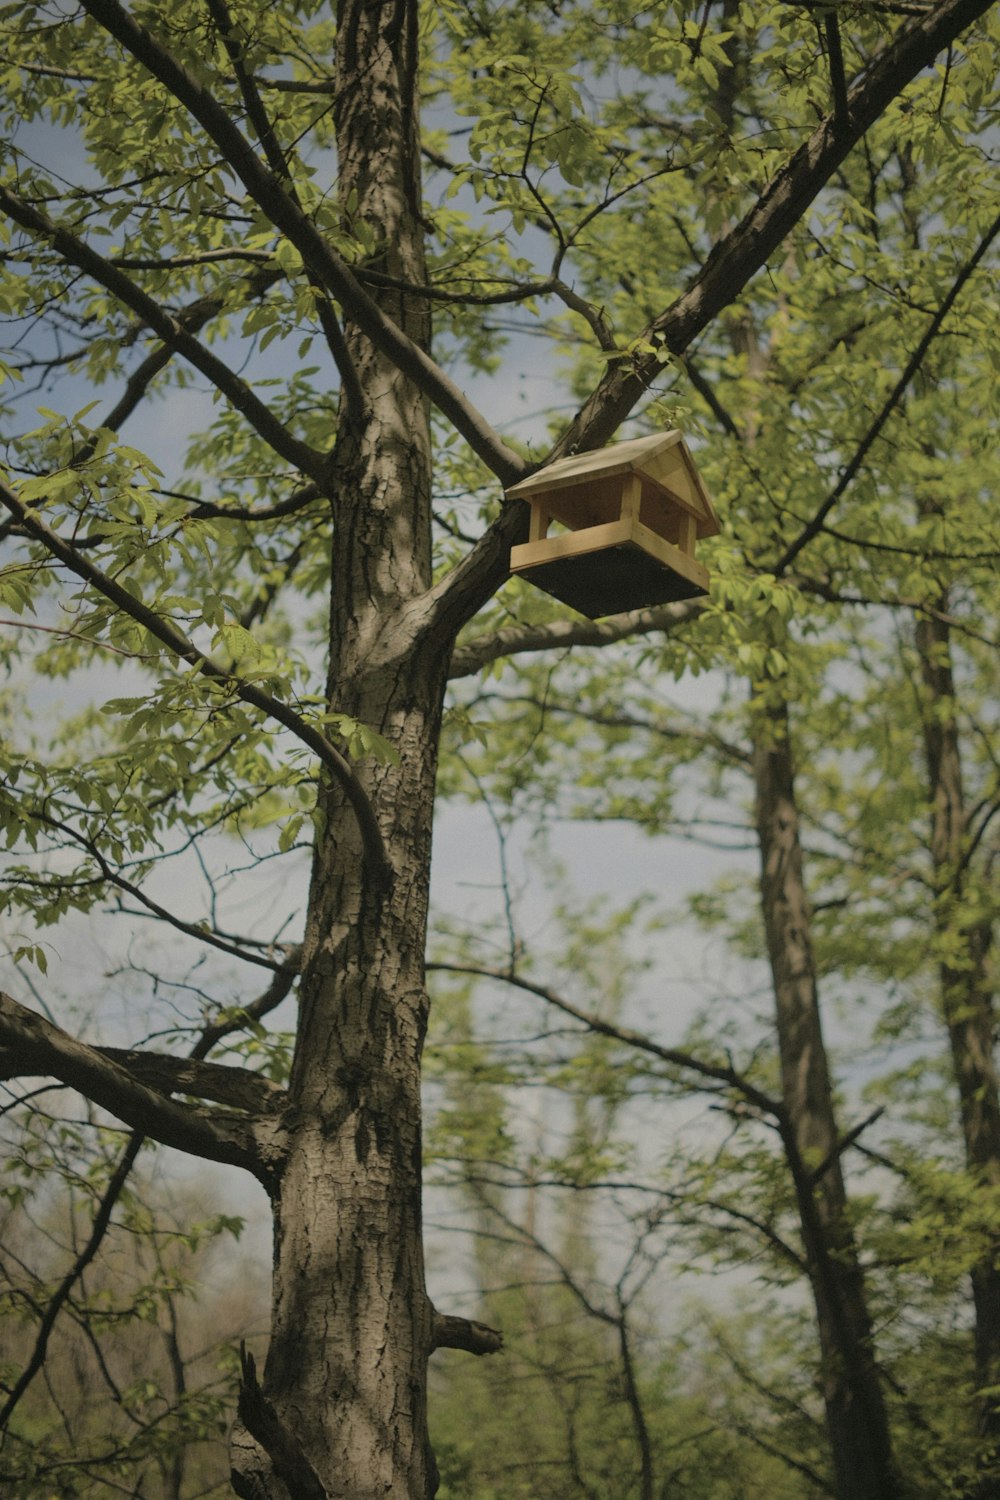 a bird house hanging from a tree in a forest